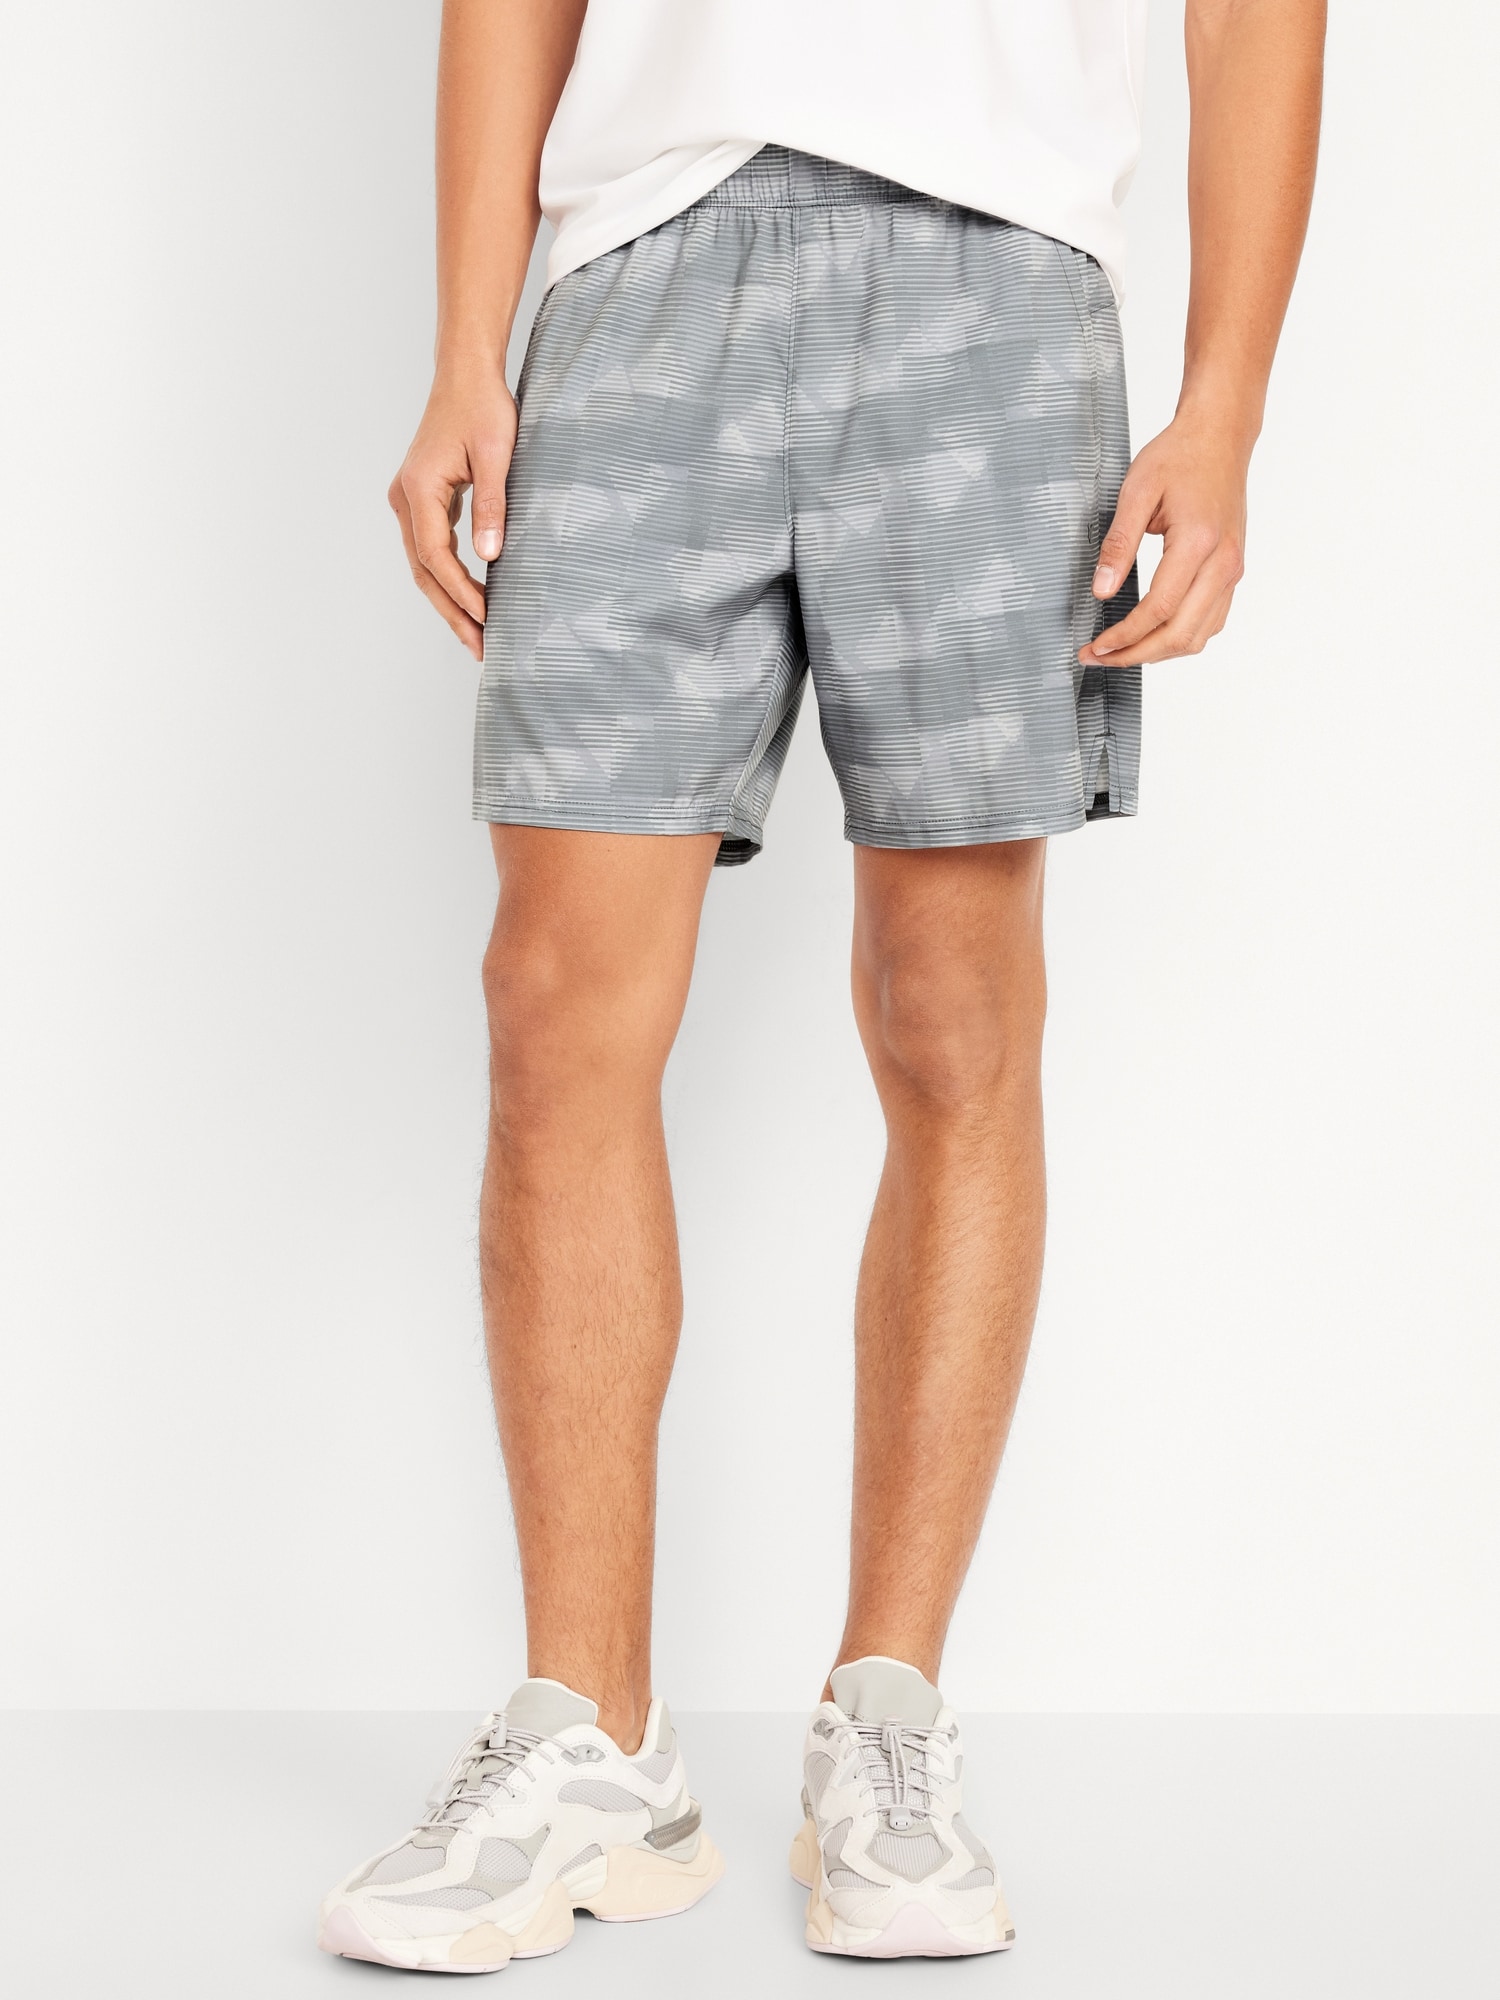 Stretch Shorts for Men